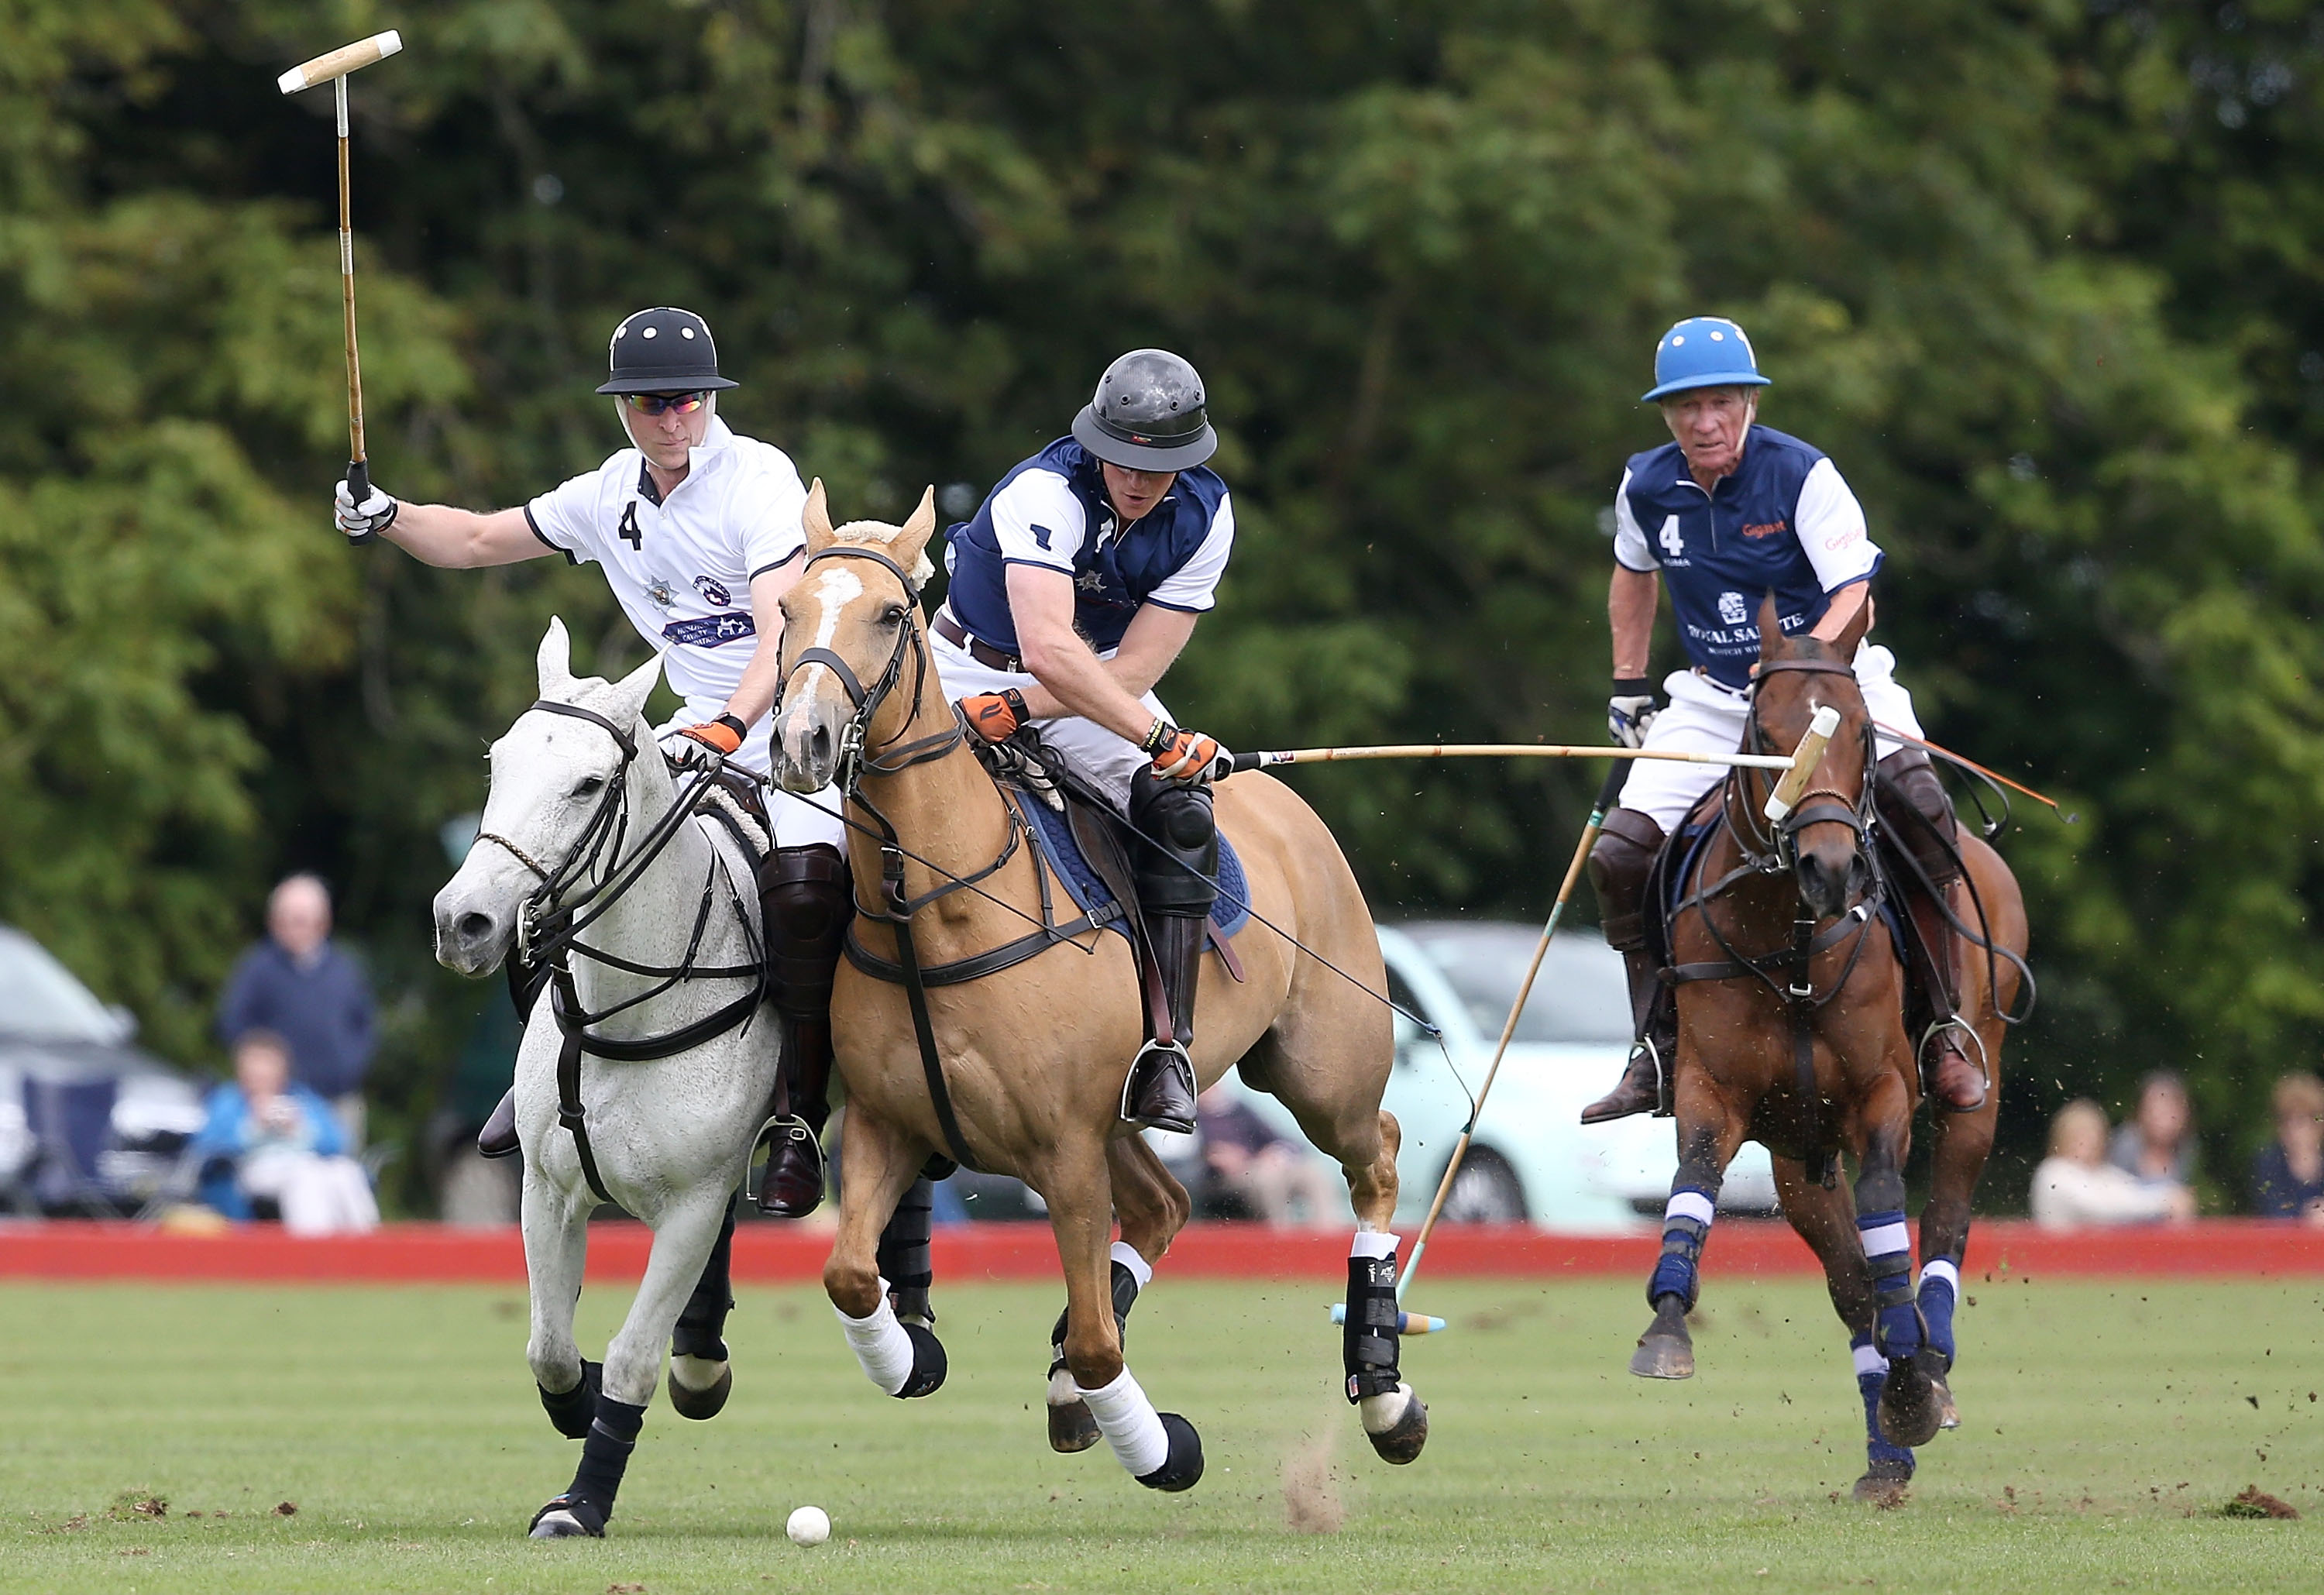 TETBURY, ENGLAND - JUNE 14: Prince Harry plays for team Royal Salute and Prince William, Duke of Cambridge plays for team Piaget at the Gigaset Charity Polo Match at Beaufort Polo Club on June 14, 2015 in Tetbury, England. (Photo by Chris Jackson/Getty Images for Gigaset Mobile) *** Local Caption *** Prince Harry; Prince William; Duke of Cambridge